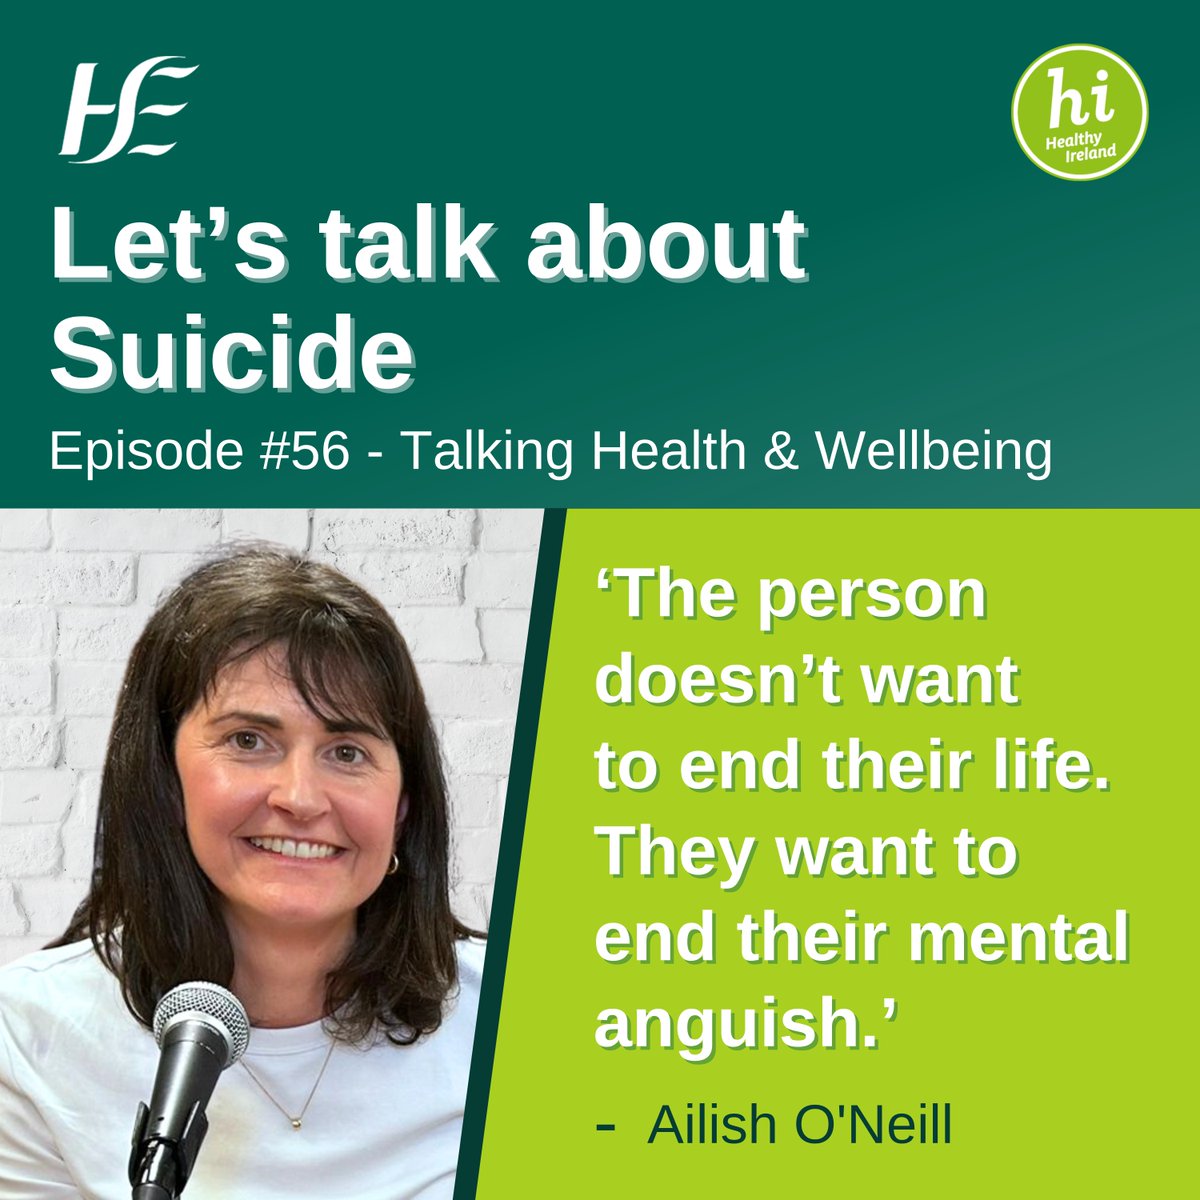 In this week's #Podcast we discuss the new free HSE suicide prevention training programme, ‘Let’s Talk About Suicide’ that helps participants identify people who are at risk, approach them confidently and connect them with supportive resources. Listen: spoti.fi/4dpihkp